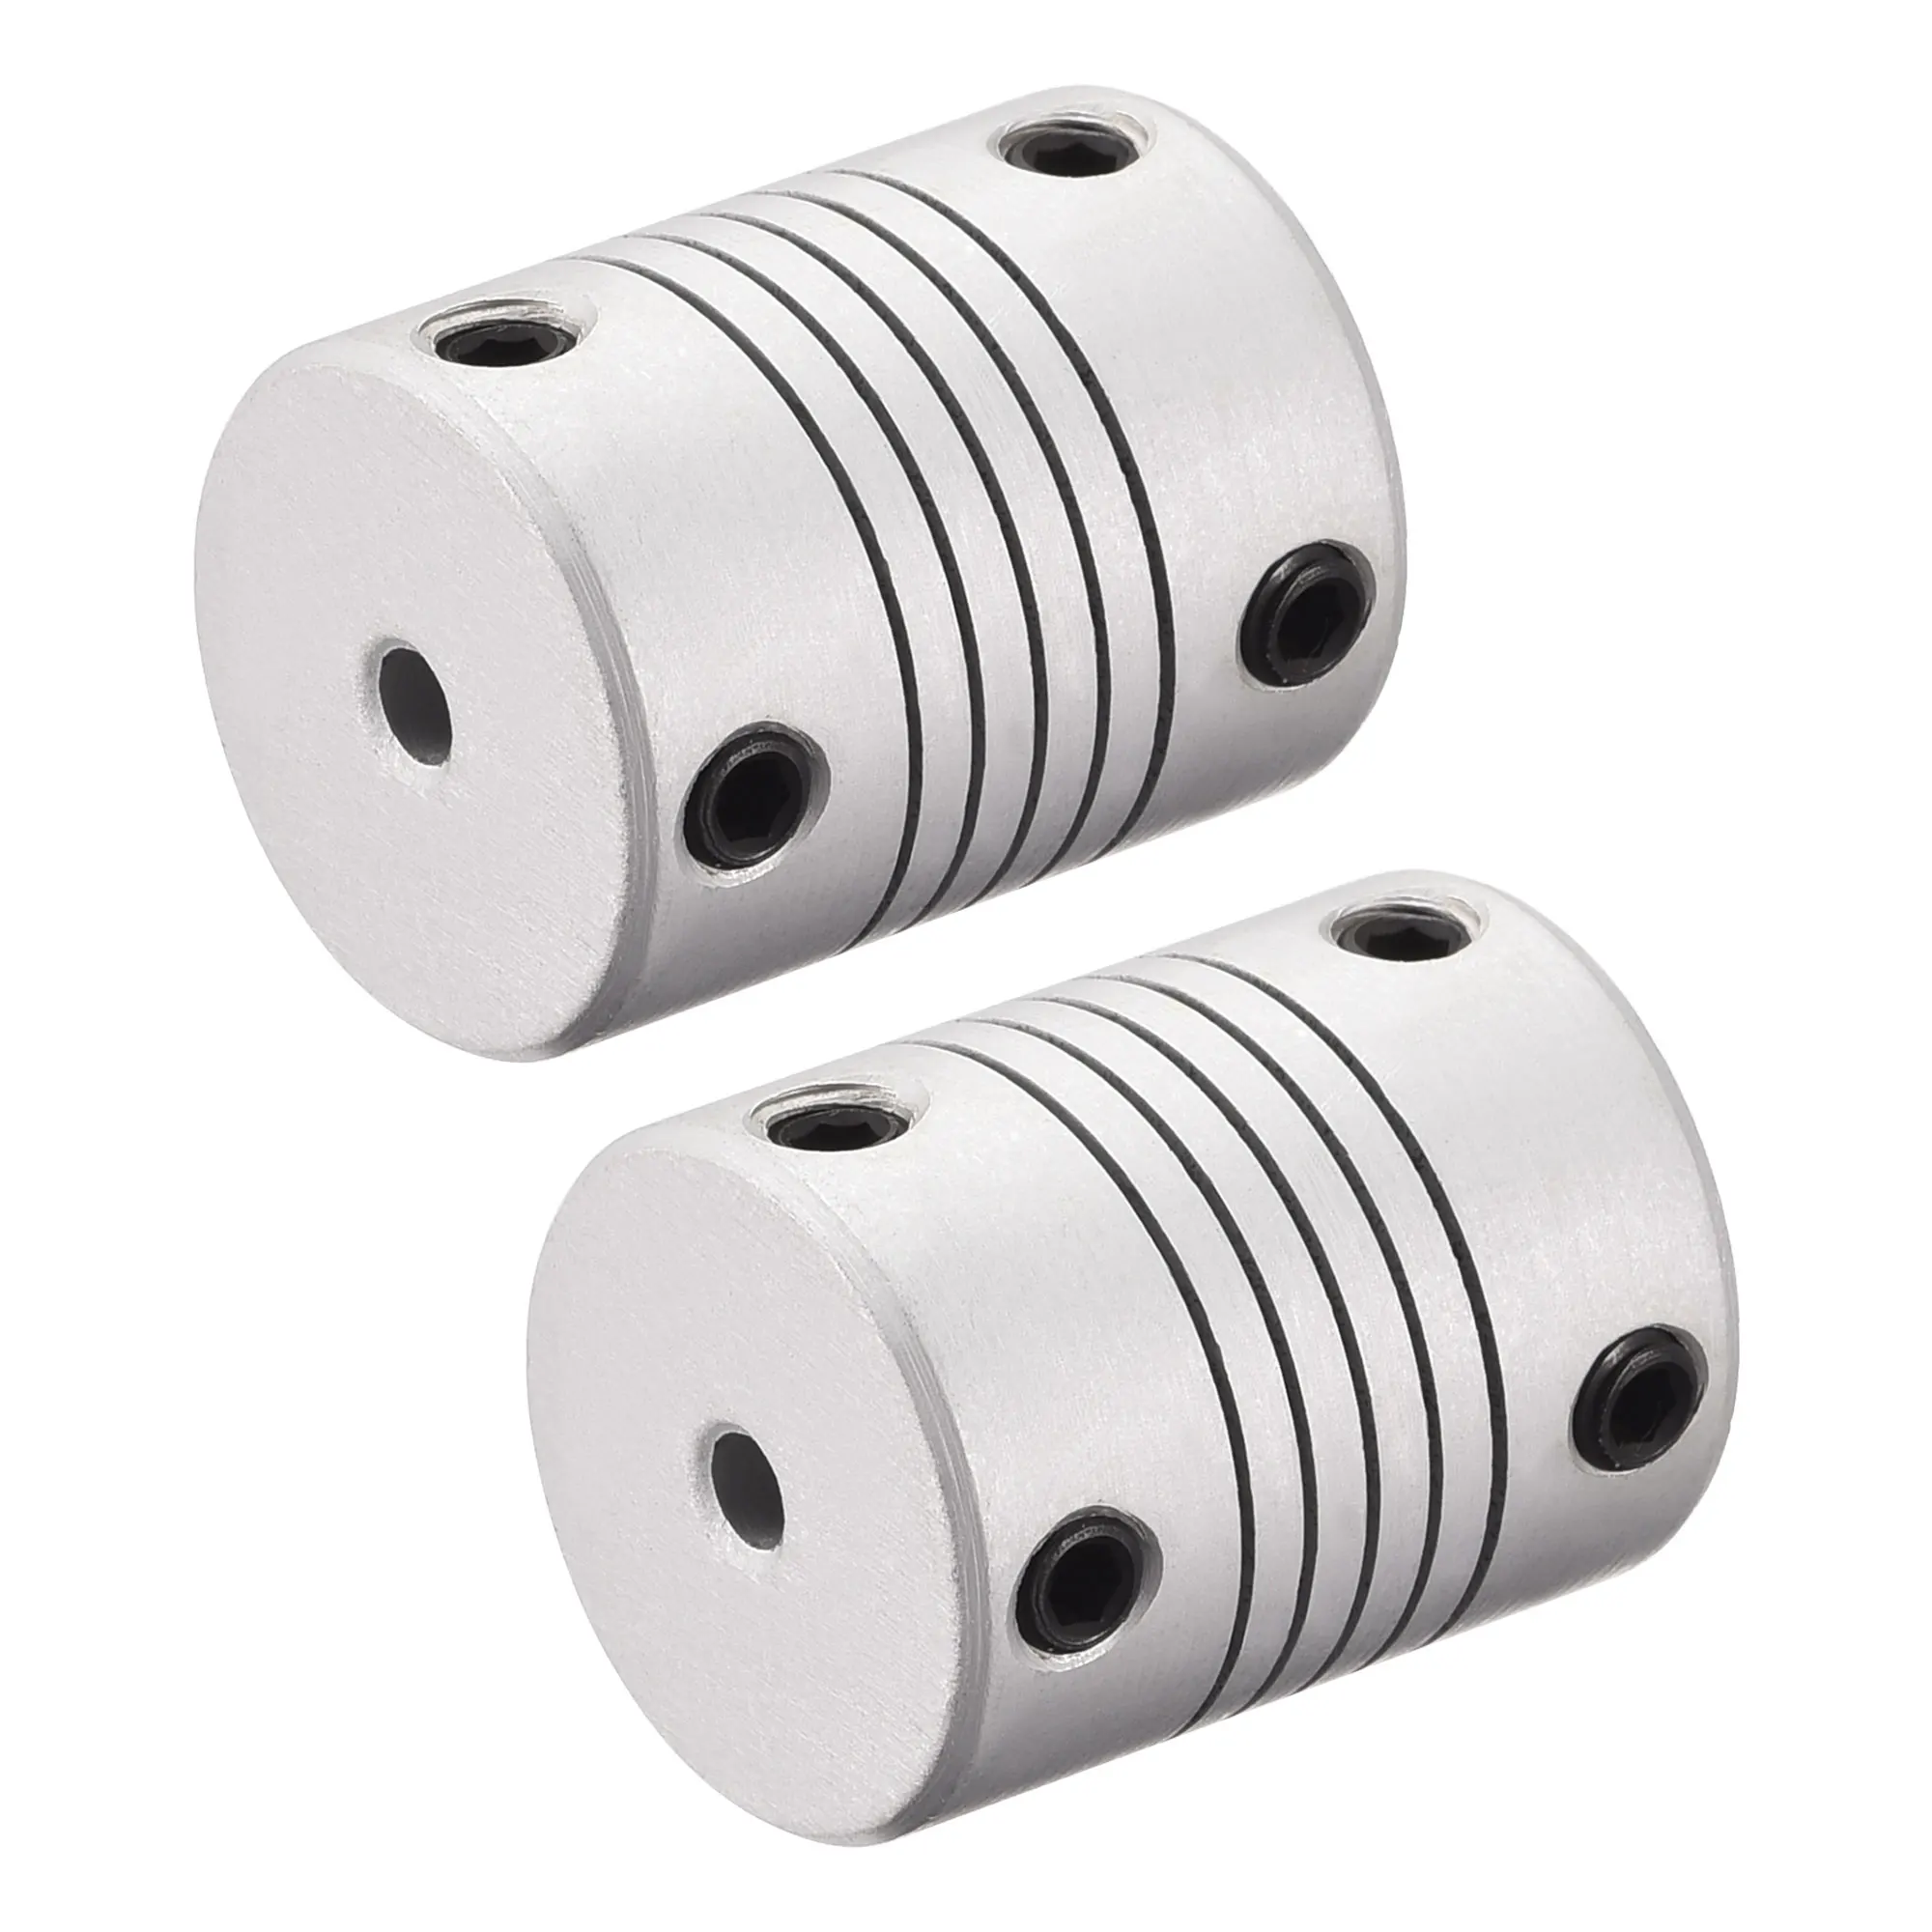 

Uxcell 3mm to 5mm Aluminum Alloy Shaft Coupling Flexible Coupler Motor Connector Joint L25xD19 Silver,2pcs